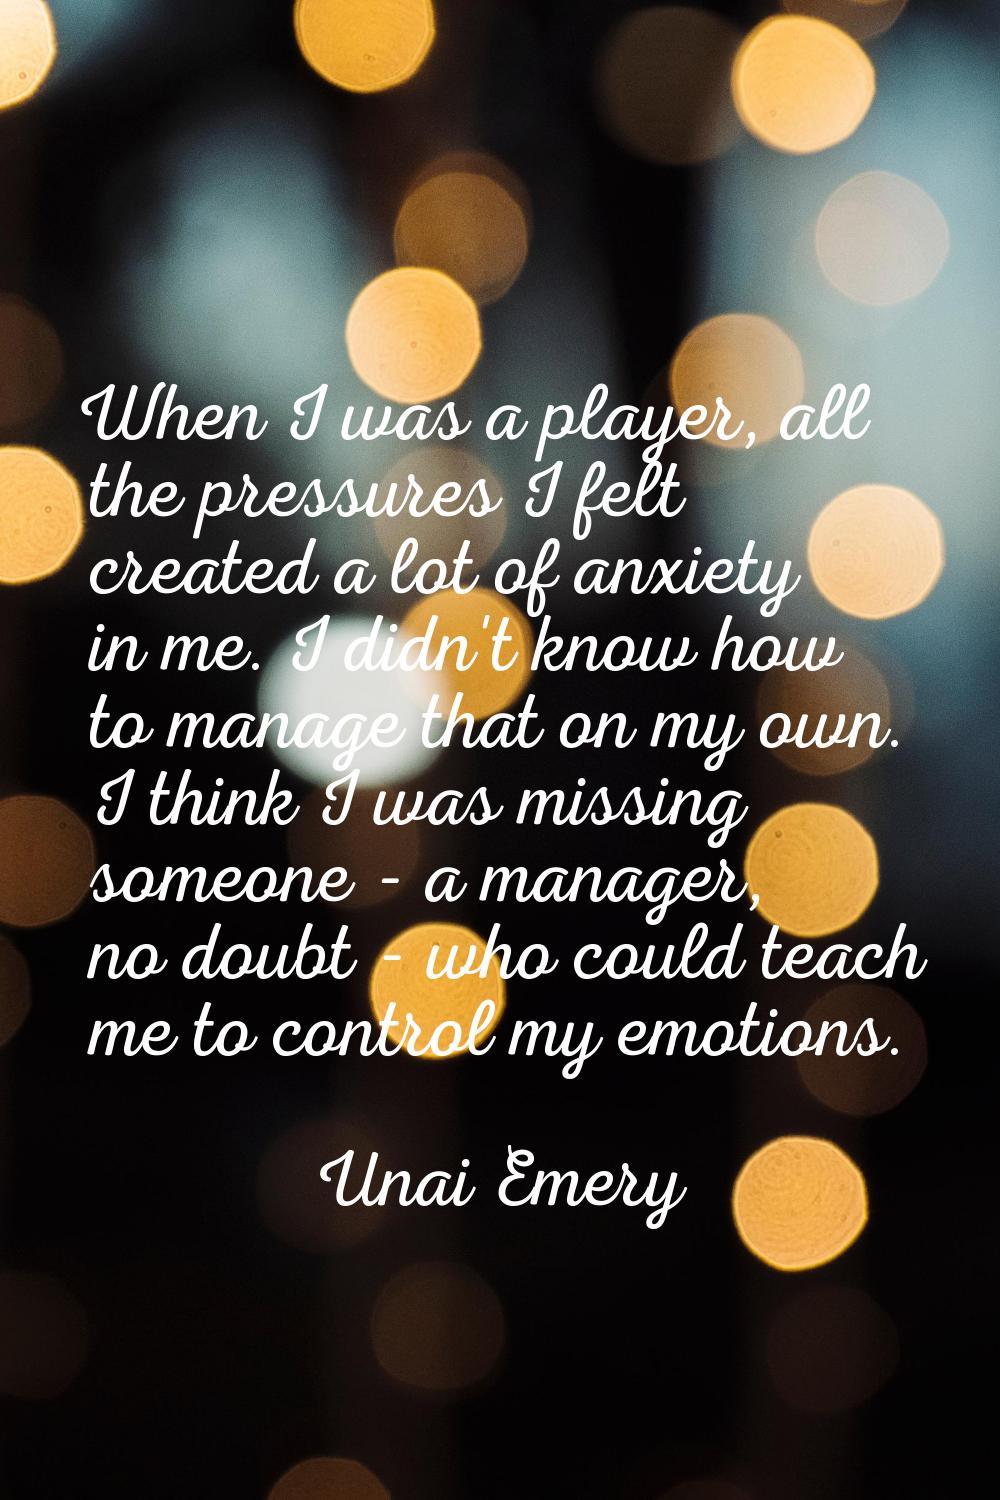 When I was a player, all the pressures I felt created a lot of anxiety in me. I didn't know how to 